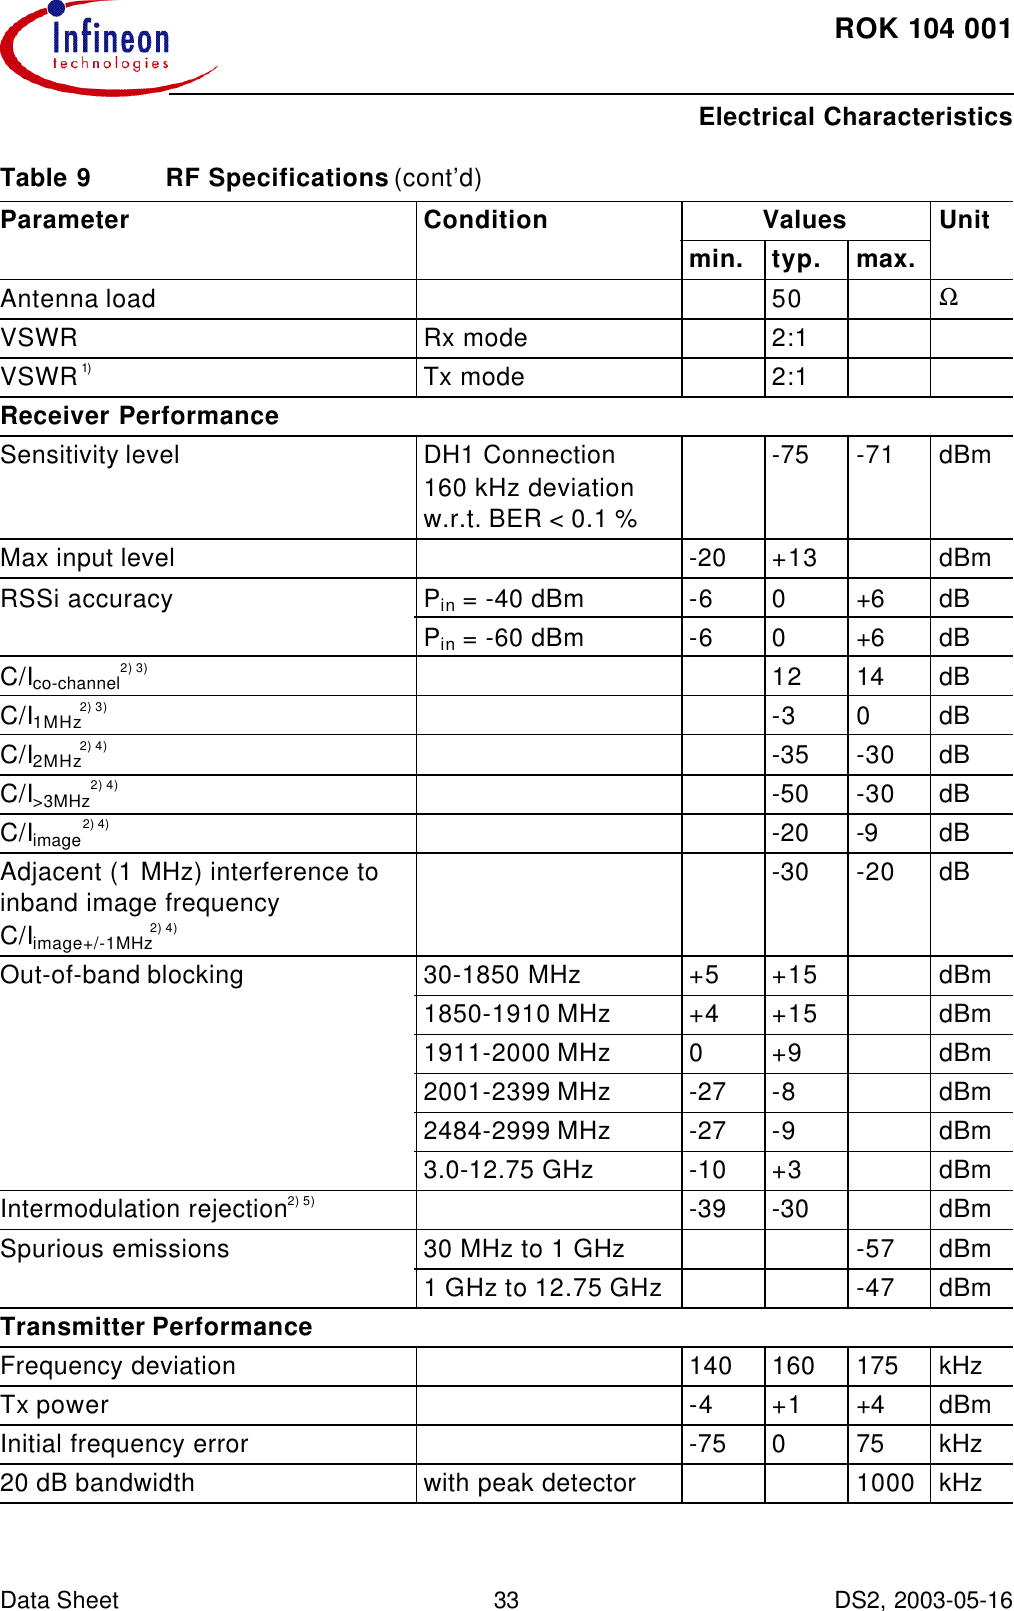 ROK104001Electrical Characteristics Data Sheet 33 DS2, 2003-05-16  Antenna load 50 ΩVSWR Rx mode 2:1VSWR1) Tx mode 2:1Receiver Performance Sensitivity level DH1 Connection160 kHz deviationw.r.t. BER &lt; 0.1 %-75 -71 dBmMax input level -20 +13 dBmRSSi accuracy Pin = -40 dBm -6 0+6 dBPin = -60 dBm -6 0+6 dBC/Ico-channel2) 3) 12 14 dBC/I1MHz2) 3) -3 0dBC/I2MHz2) 4) -35 -30 dBC/I&gt;3MHz2) 4) -50 -30 dBC/Iimage2) 4) -20 -9 dBAdjacent (1 MHz) interference to inband image frequencyC/Iimage+/-1MHz2) 4)-30 -20 dBOut-of-band blocking 30-1850 MHz +5 +15 dBm1850-1910 MHz +4 +15 dBm1911-2000 MHz 0+9 dBm2001-2399 MHz -27 -8 dBm2484-2999 MHz -27 -9 dBm3.0-12.75 GHz -10 +3 dBmIntermodulation rejection2) 5) -39 -30 dBmSpurious emissions 30 MHz to 1 GHz -57 dBm1 GHz to 12.75 GHz -47 dBmTransmitter PerformanceFrequency deviation 140 160 175 kHzTx power -4 +1 +4 dBmInitial frequency error -75 0 75 kHz20 dB bandwidth with peak detector 1000 kHzTable9 RF Specifications (cont’d)Parameter Condition Values Unitmin. typ. max.